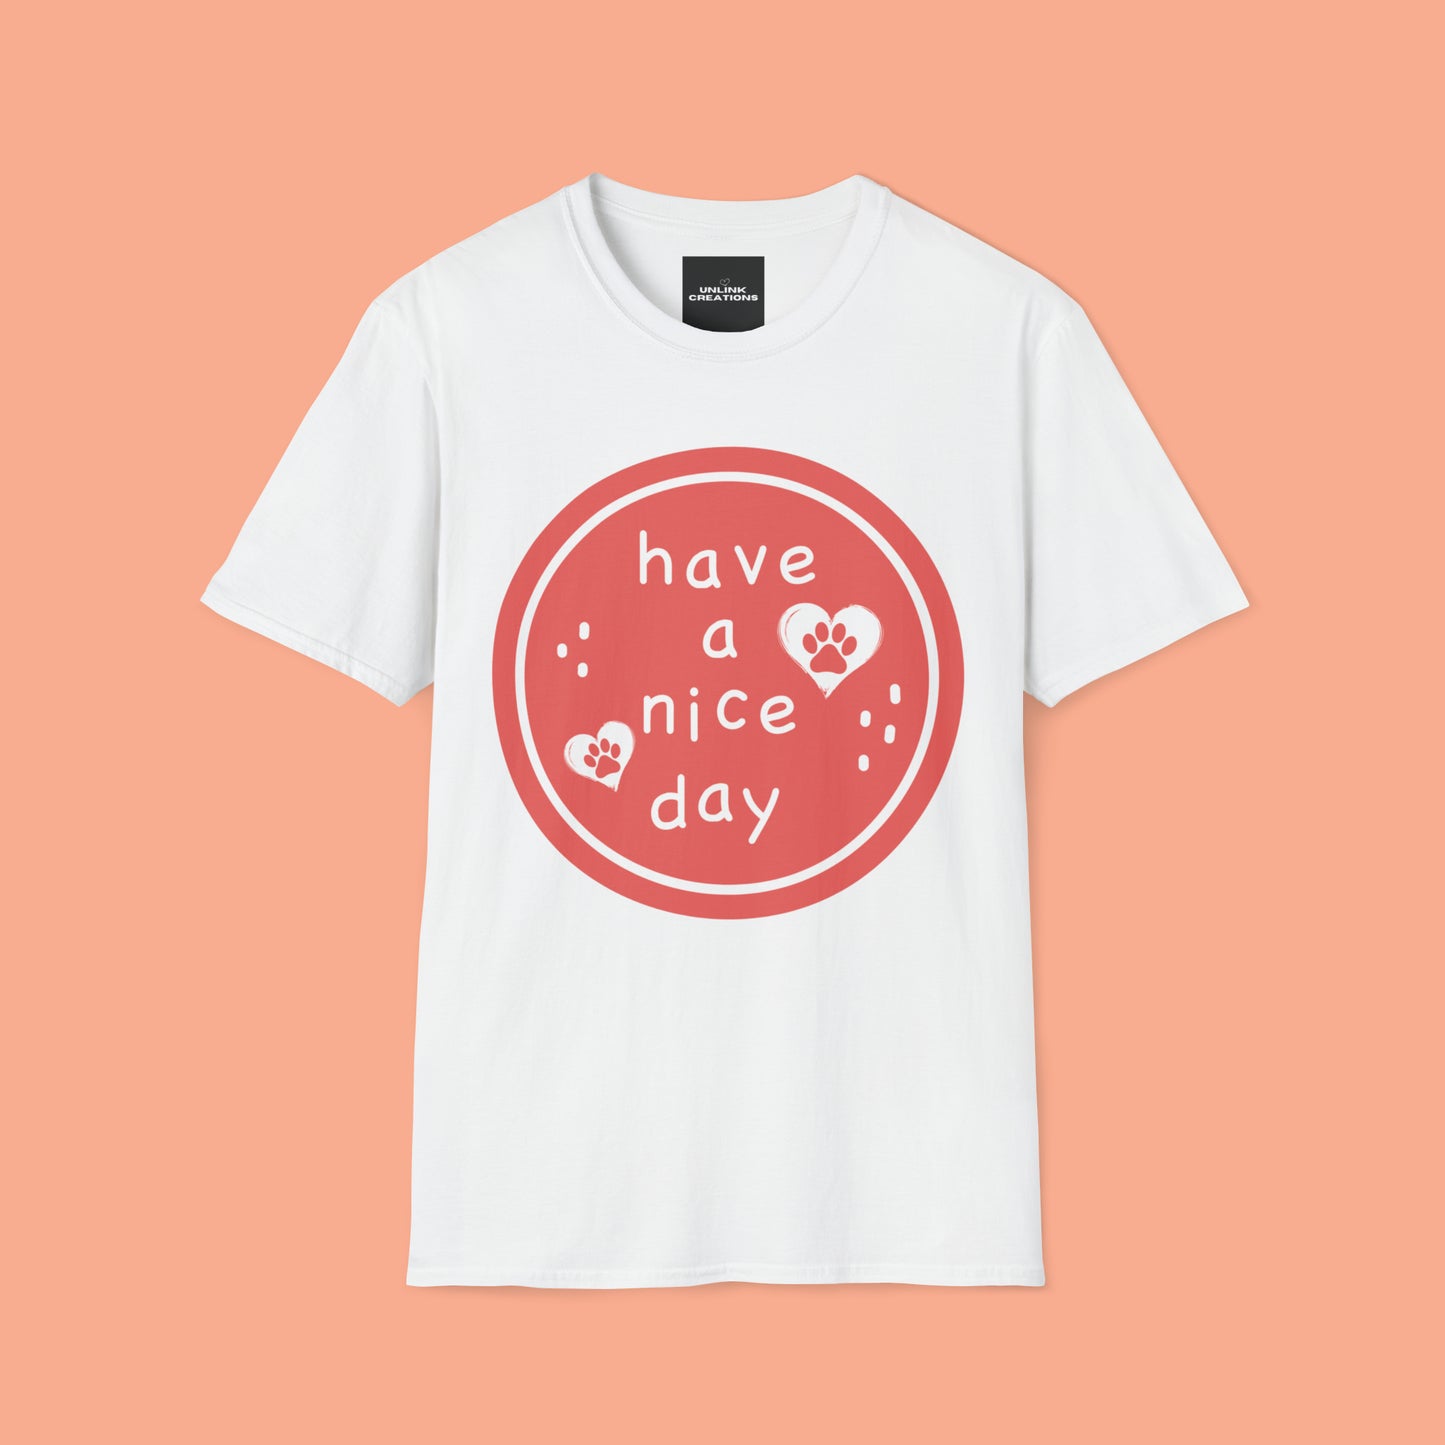 Wish everyone “have a nice day” with this furry friend inspired Unisex Softstyle T-Shirt.